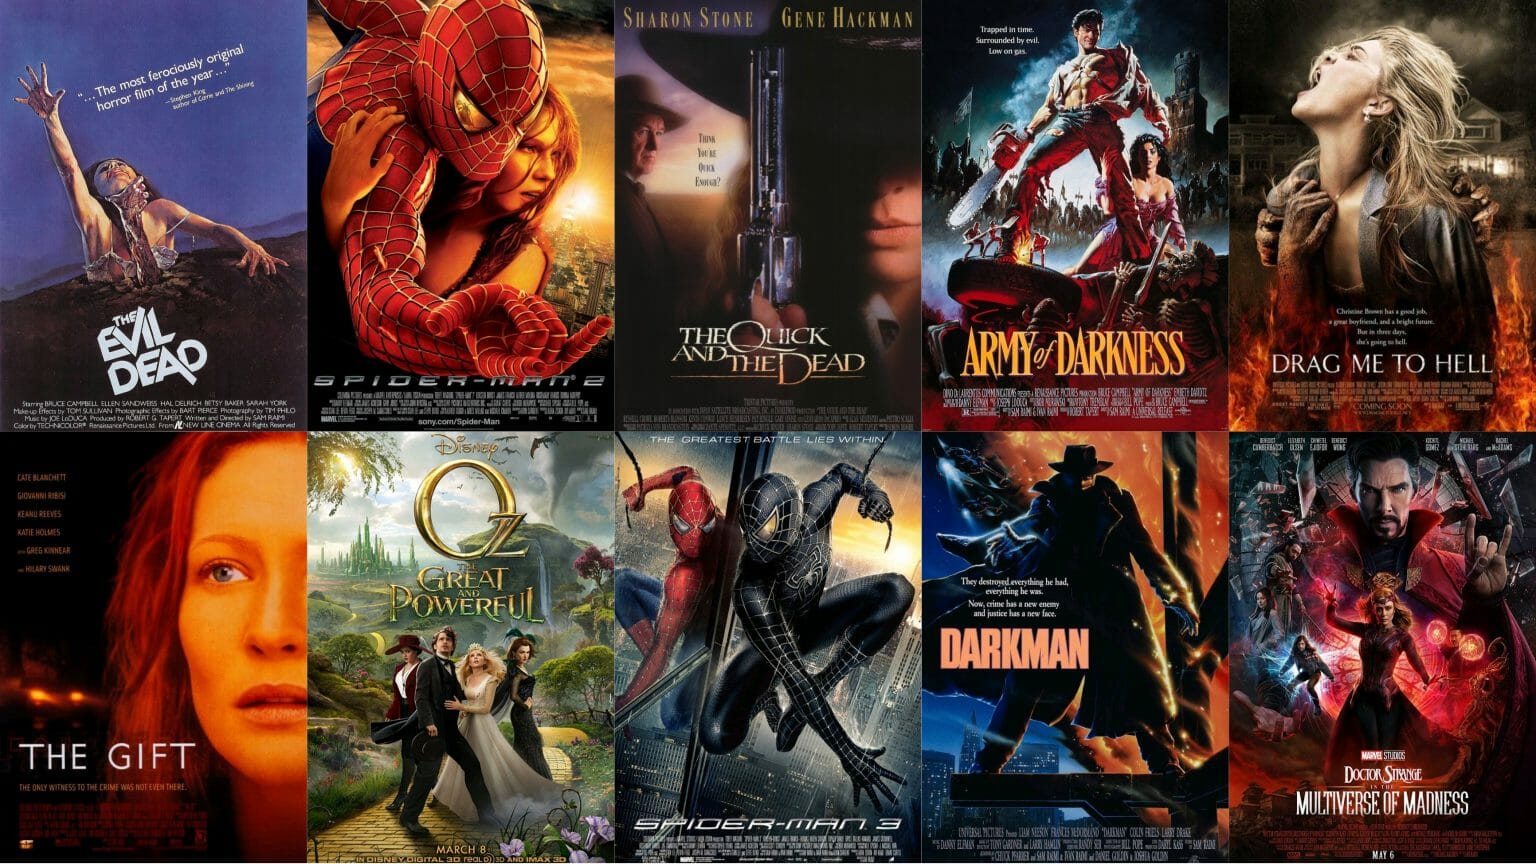 The feature film posters of Sam Raimi collaged together, including THE EVIL DEAD, his SPIDER-MAN Trilogy, DARKMAN, OZ: THE GREAT & POWERFUL, THE GIFT, DRAG ME TO HELL, ARMY OF DARKNESS, THE QUICK & THE DEAD, and DOCTOR STRANGE IN THE MULTIVERSE OF MADNESS.